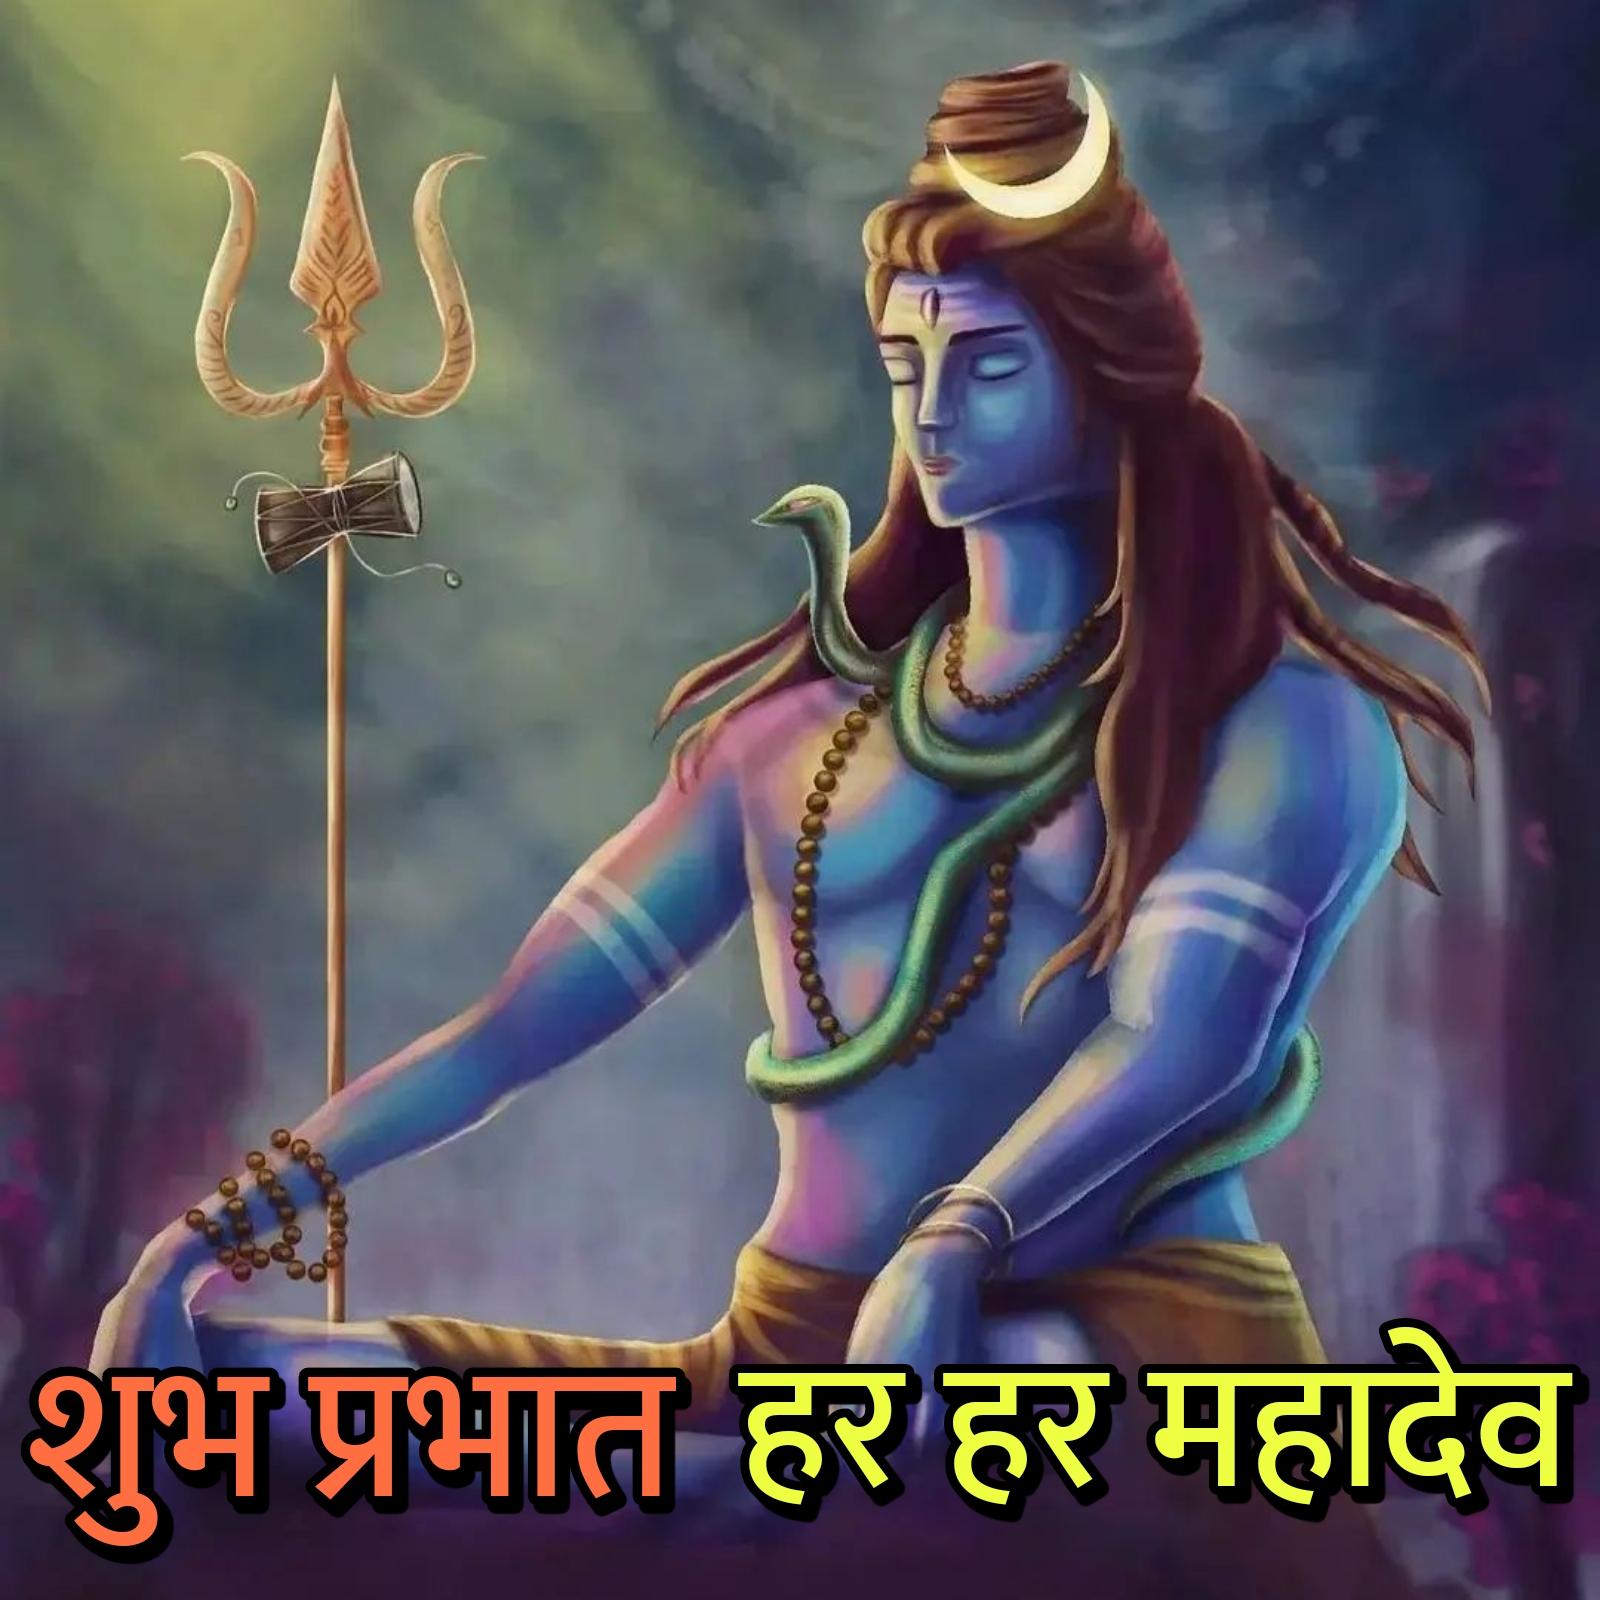 Good Morning Lord Shiva Images for WhatsApp & Facebook